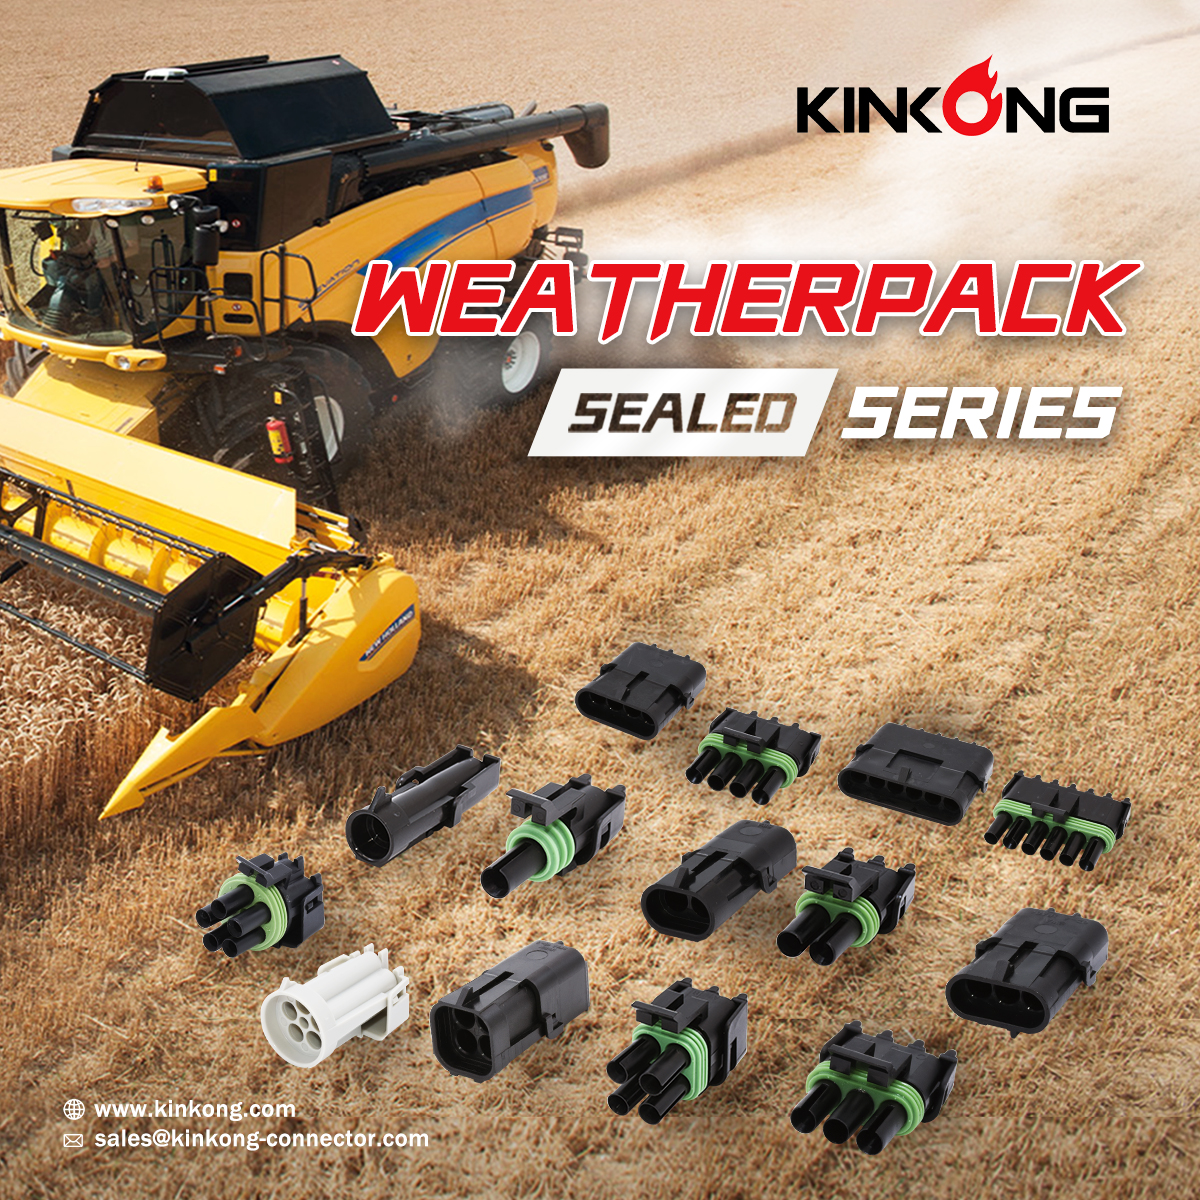 #KINKONG WEATHER PACK SERIES